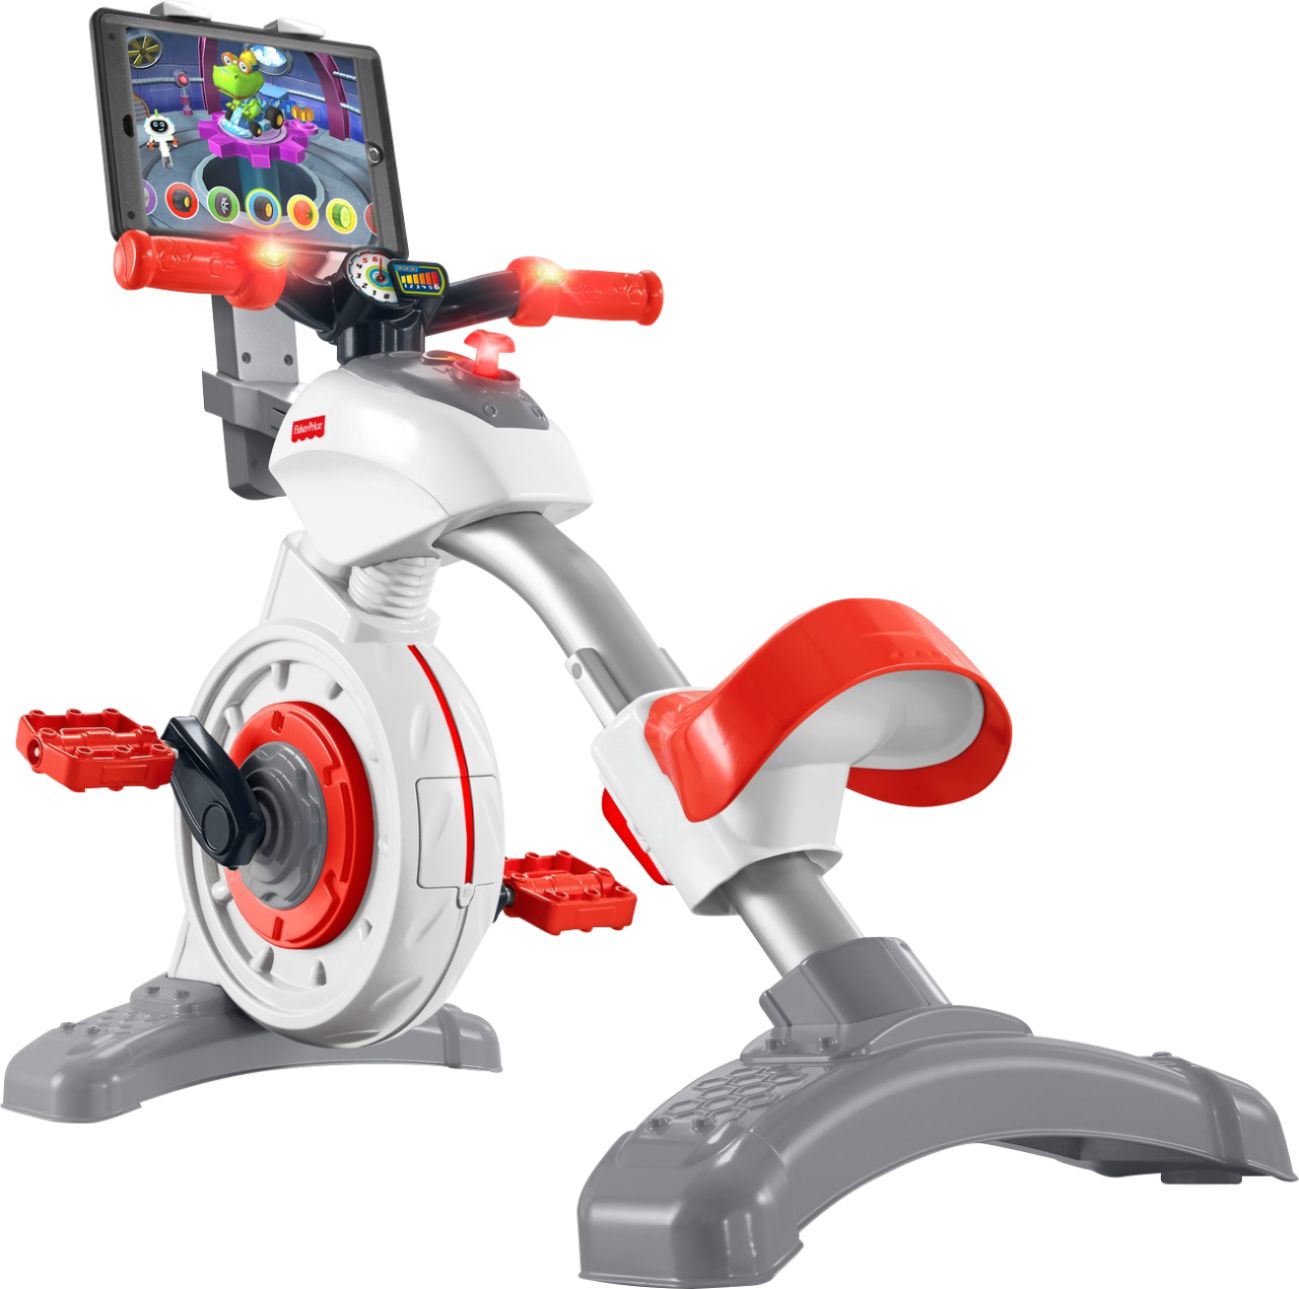 Fisher-Price Think and Learn Smart Cycle White/Gray/Red DRP30